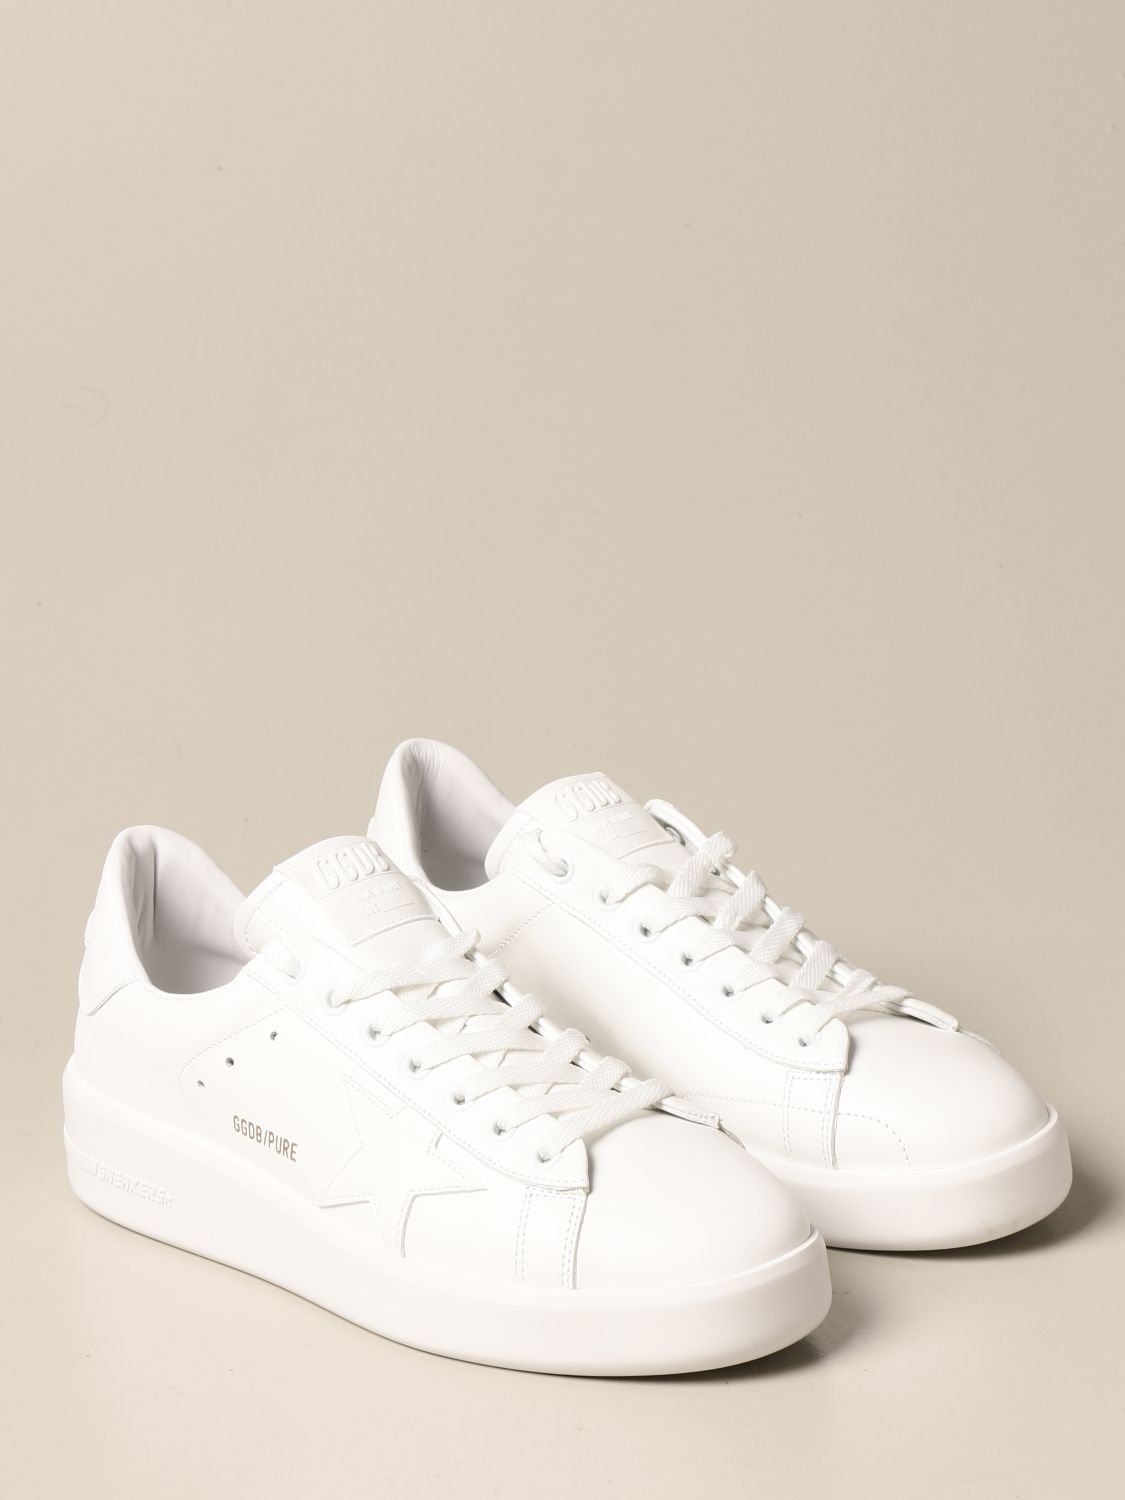 GOLDEN GOOSE: Pure New sneakers in smooth leather - White | Golden ...